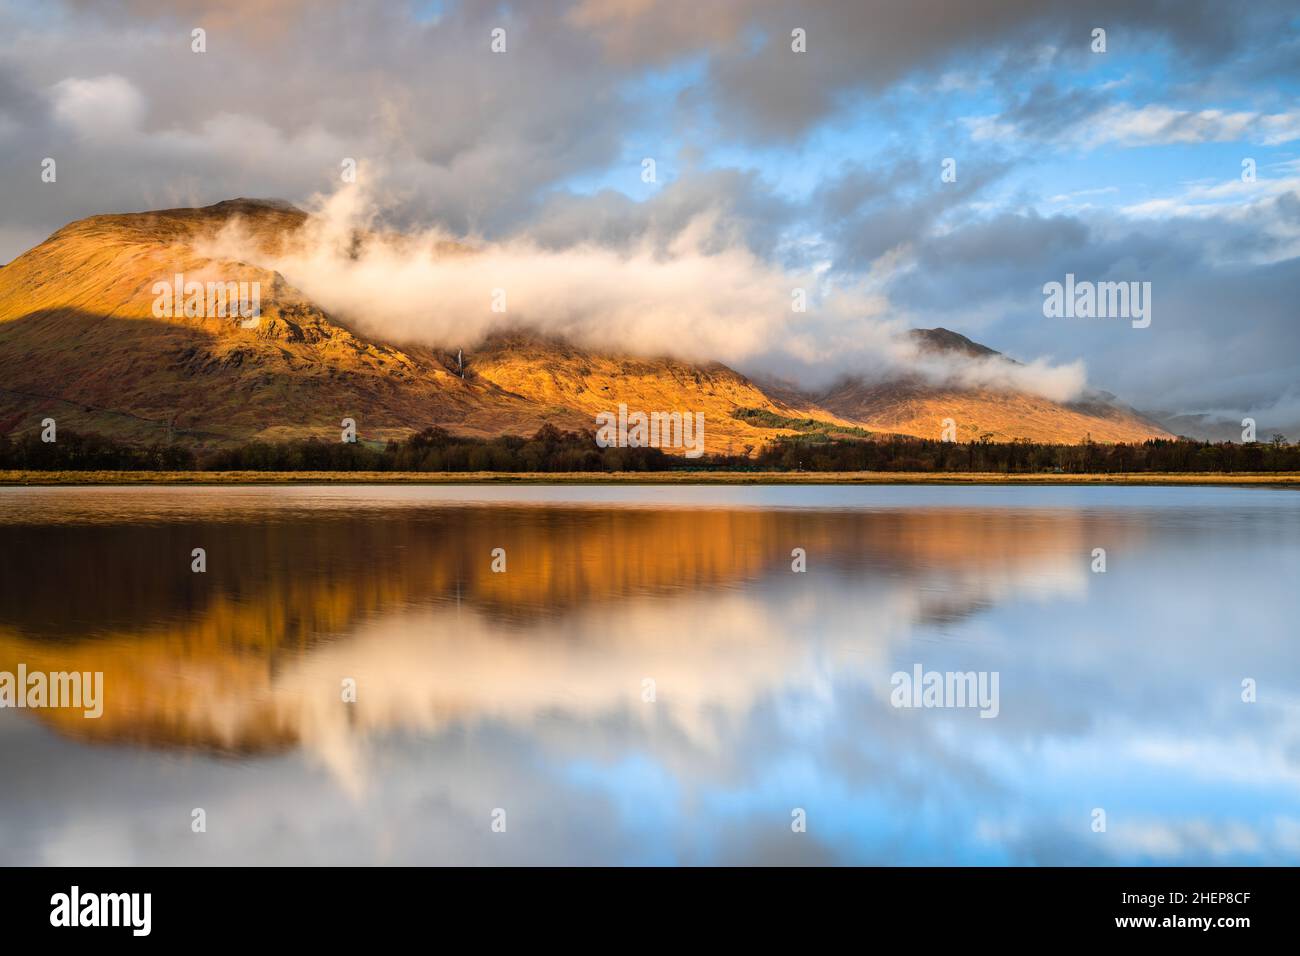 Kilchurn Castle, Loch Awe, Argyll & Bute, Scotland. Warm sunset colours striking the mountains & lighting up castle, with dramatic storm clouds in sky. Stock Photo